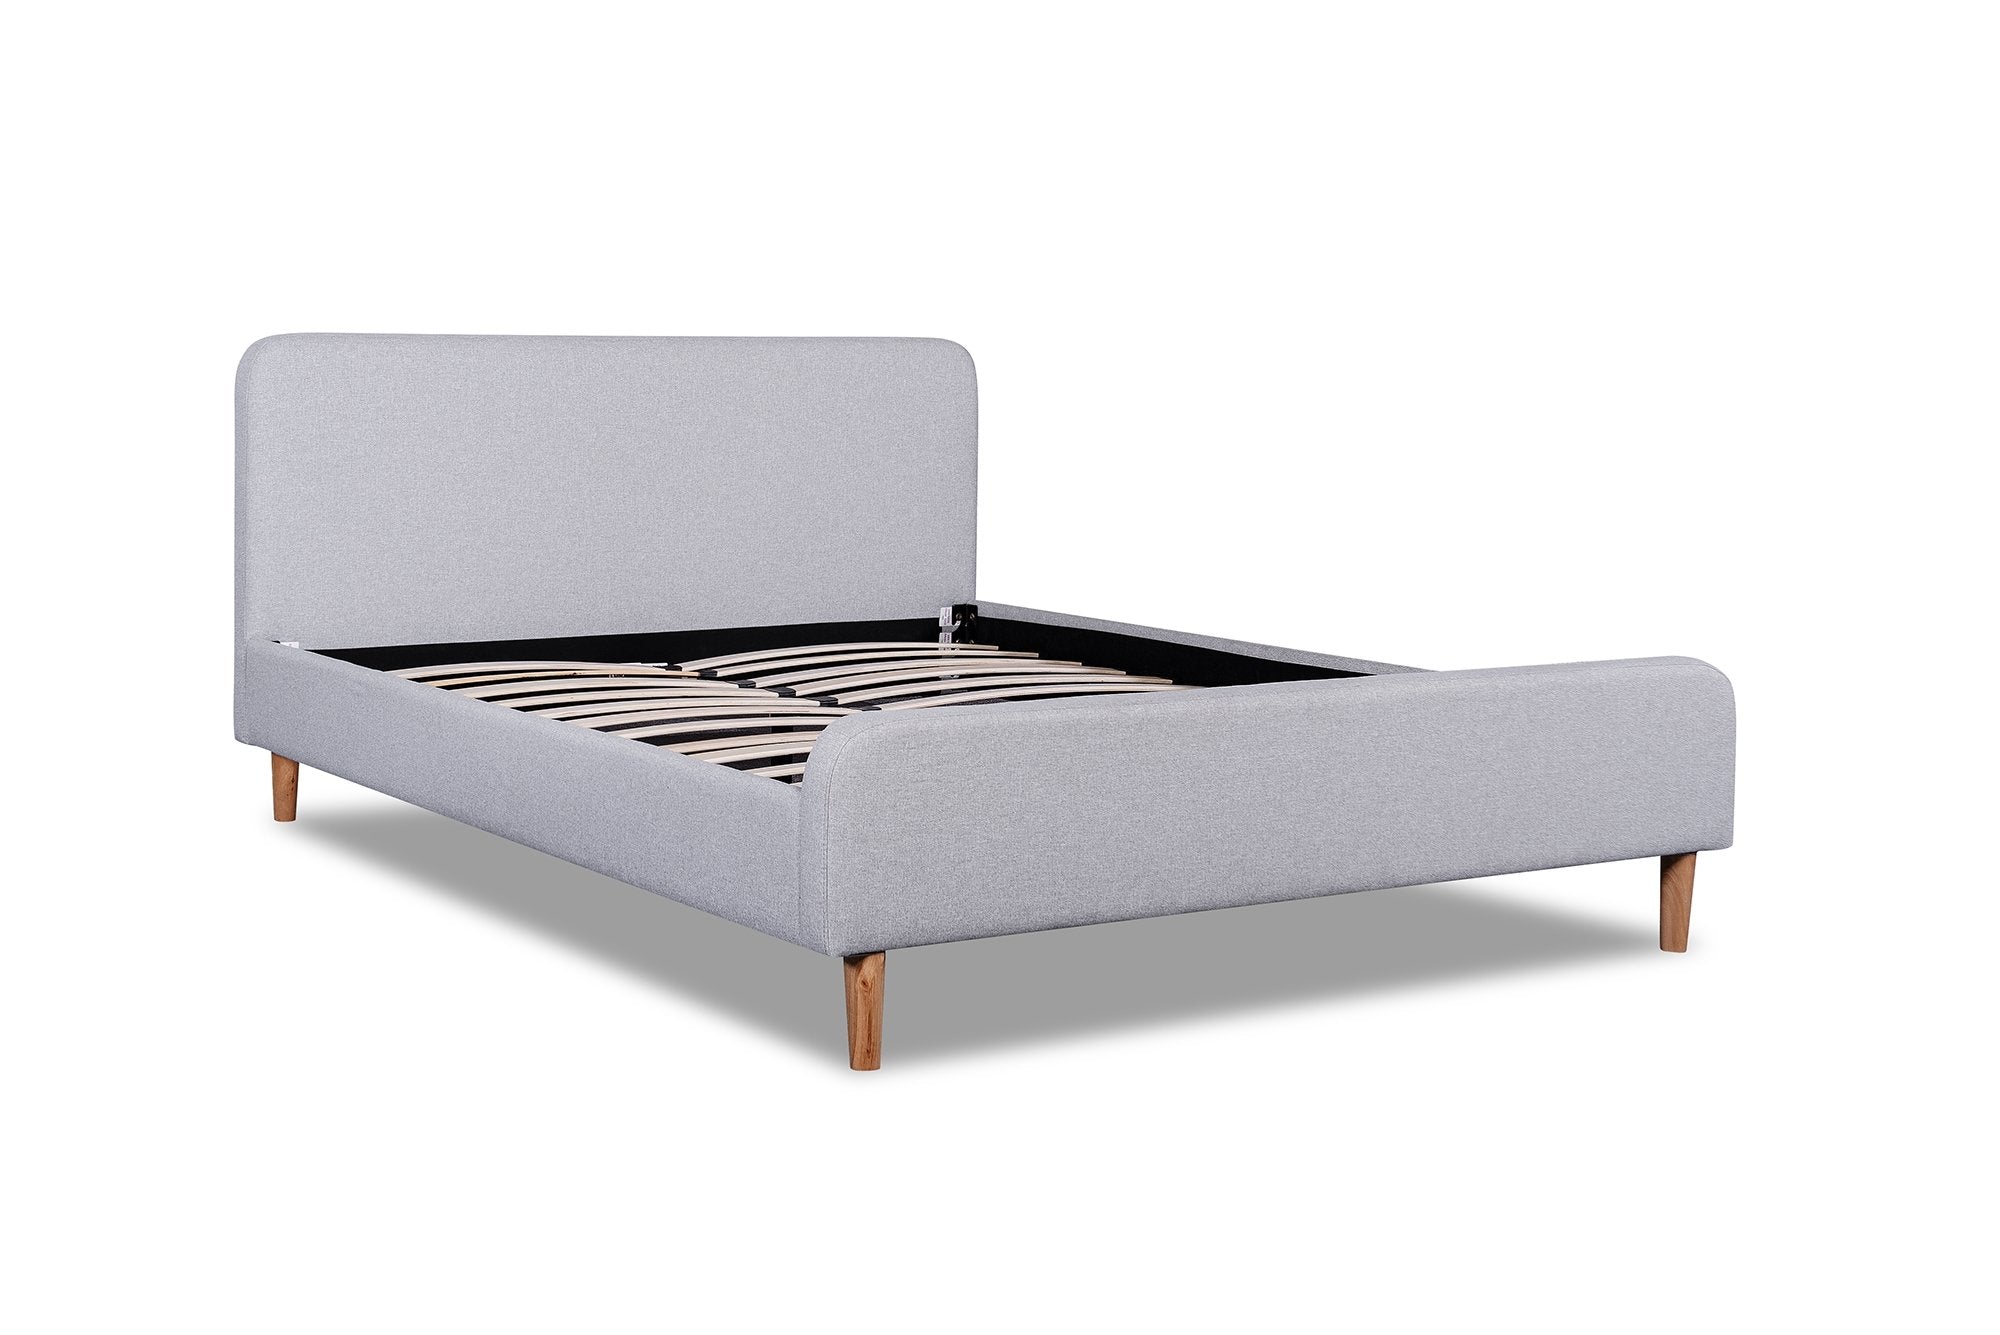 Baxter - Queen Bed frame in Rhino Grey Fabric